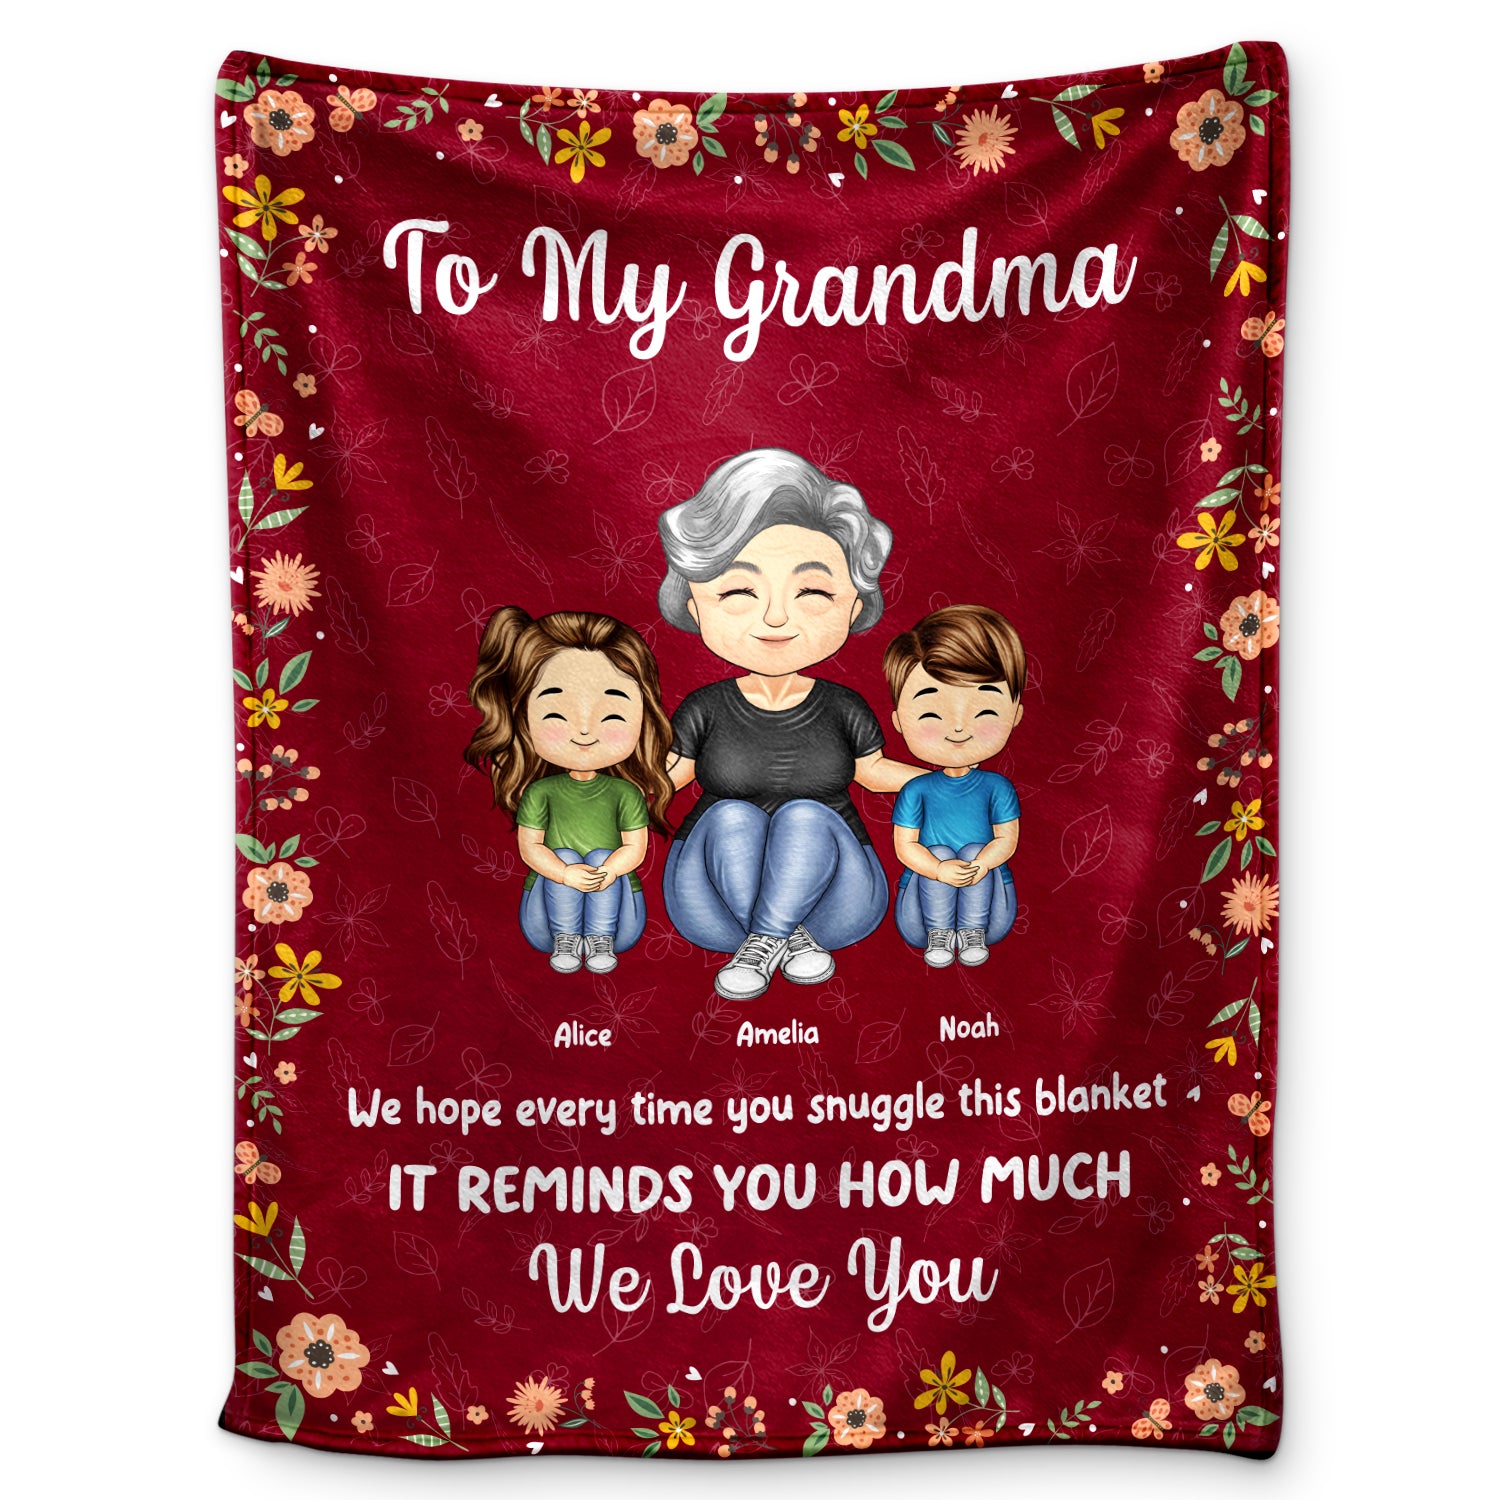 We Hope Every Time You Snuggle This Blanket - Gift For Mom, Grandma - Personalized Fleece Blanket